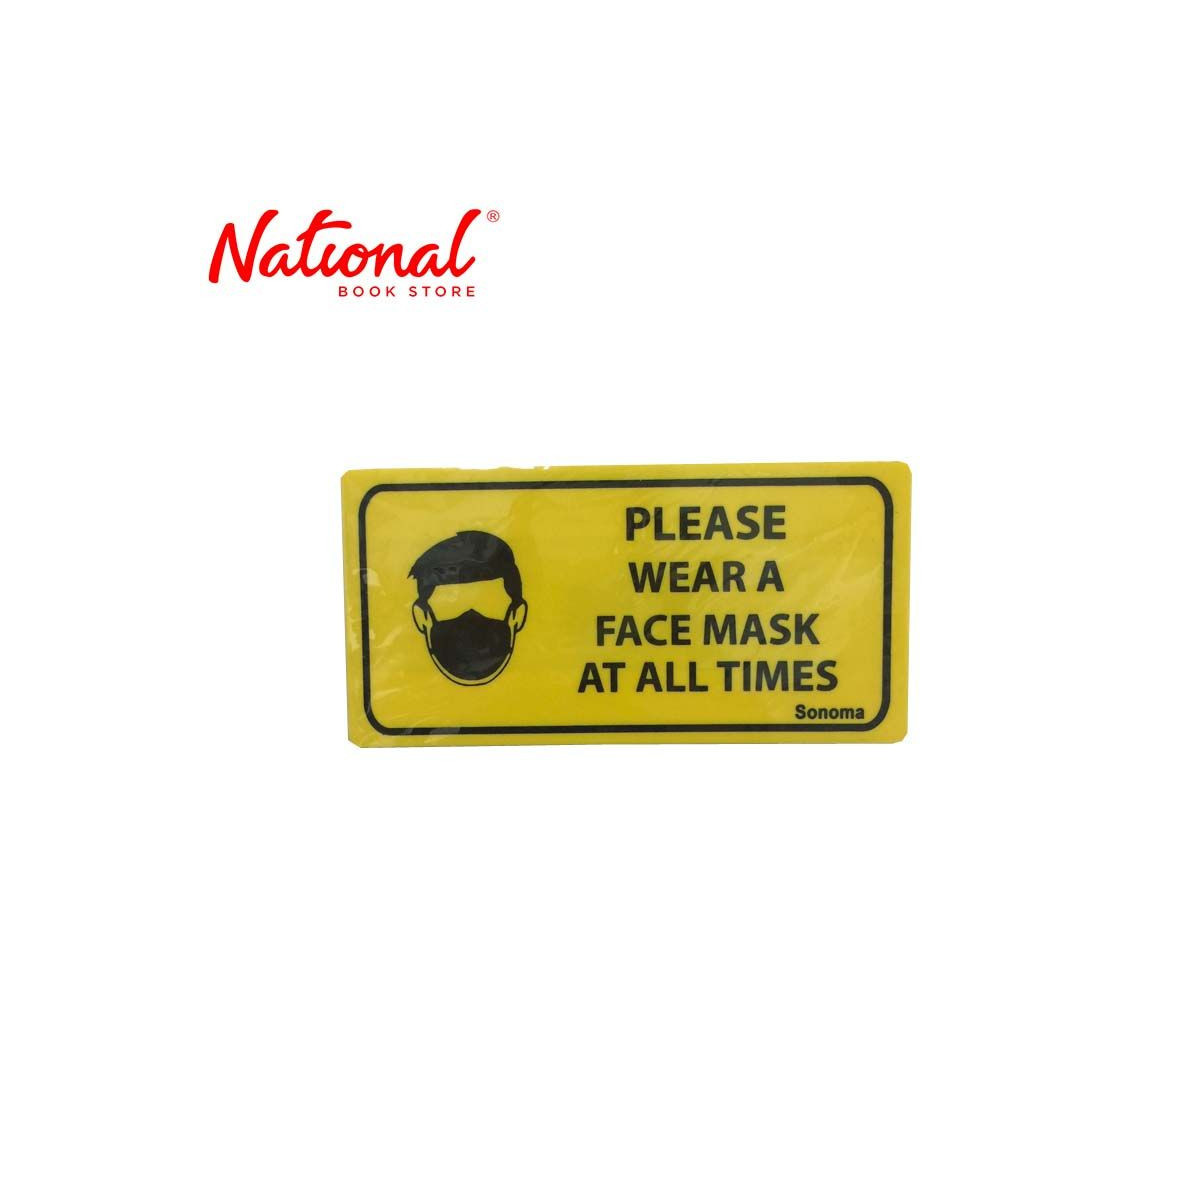 Sonoma Signage 4x8 inches Yellow Please Wear Facemask at all times - Business Office Supplies